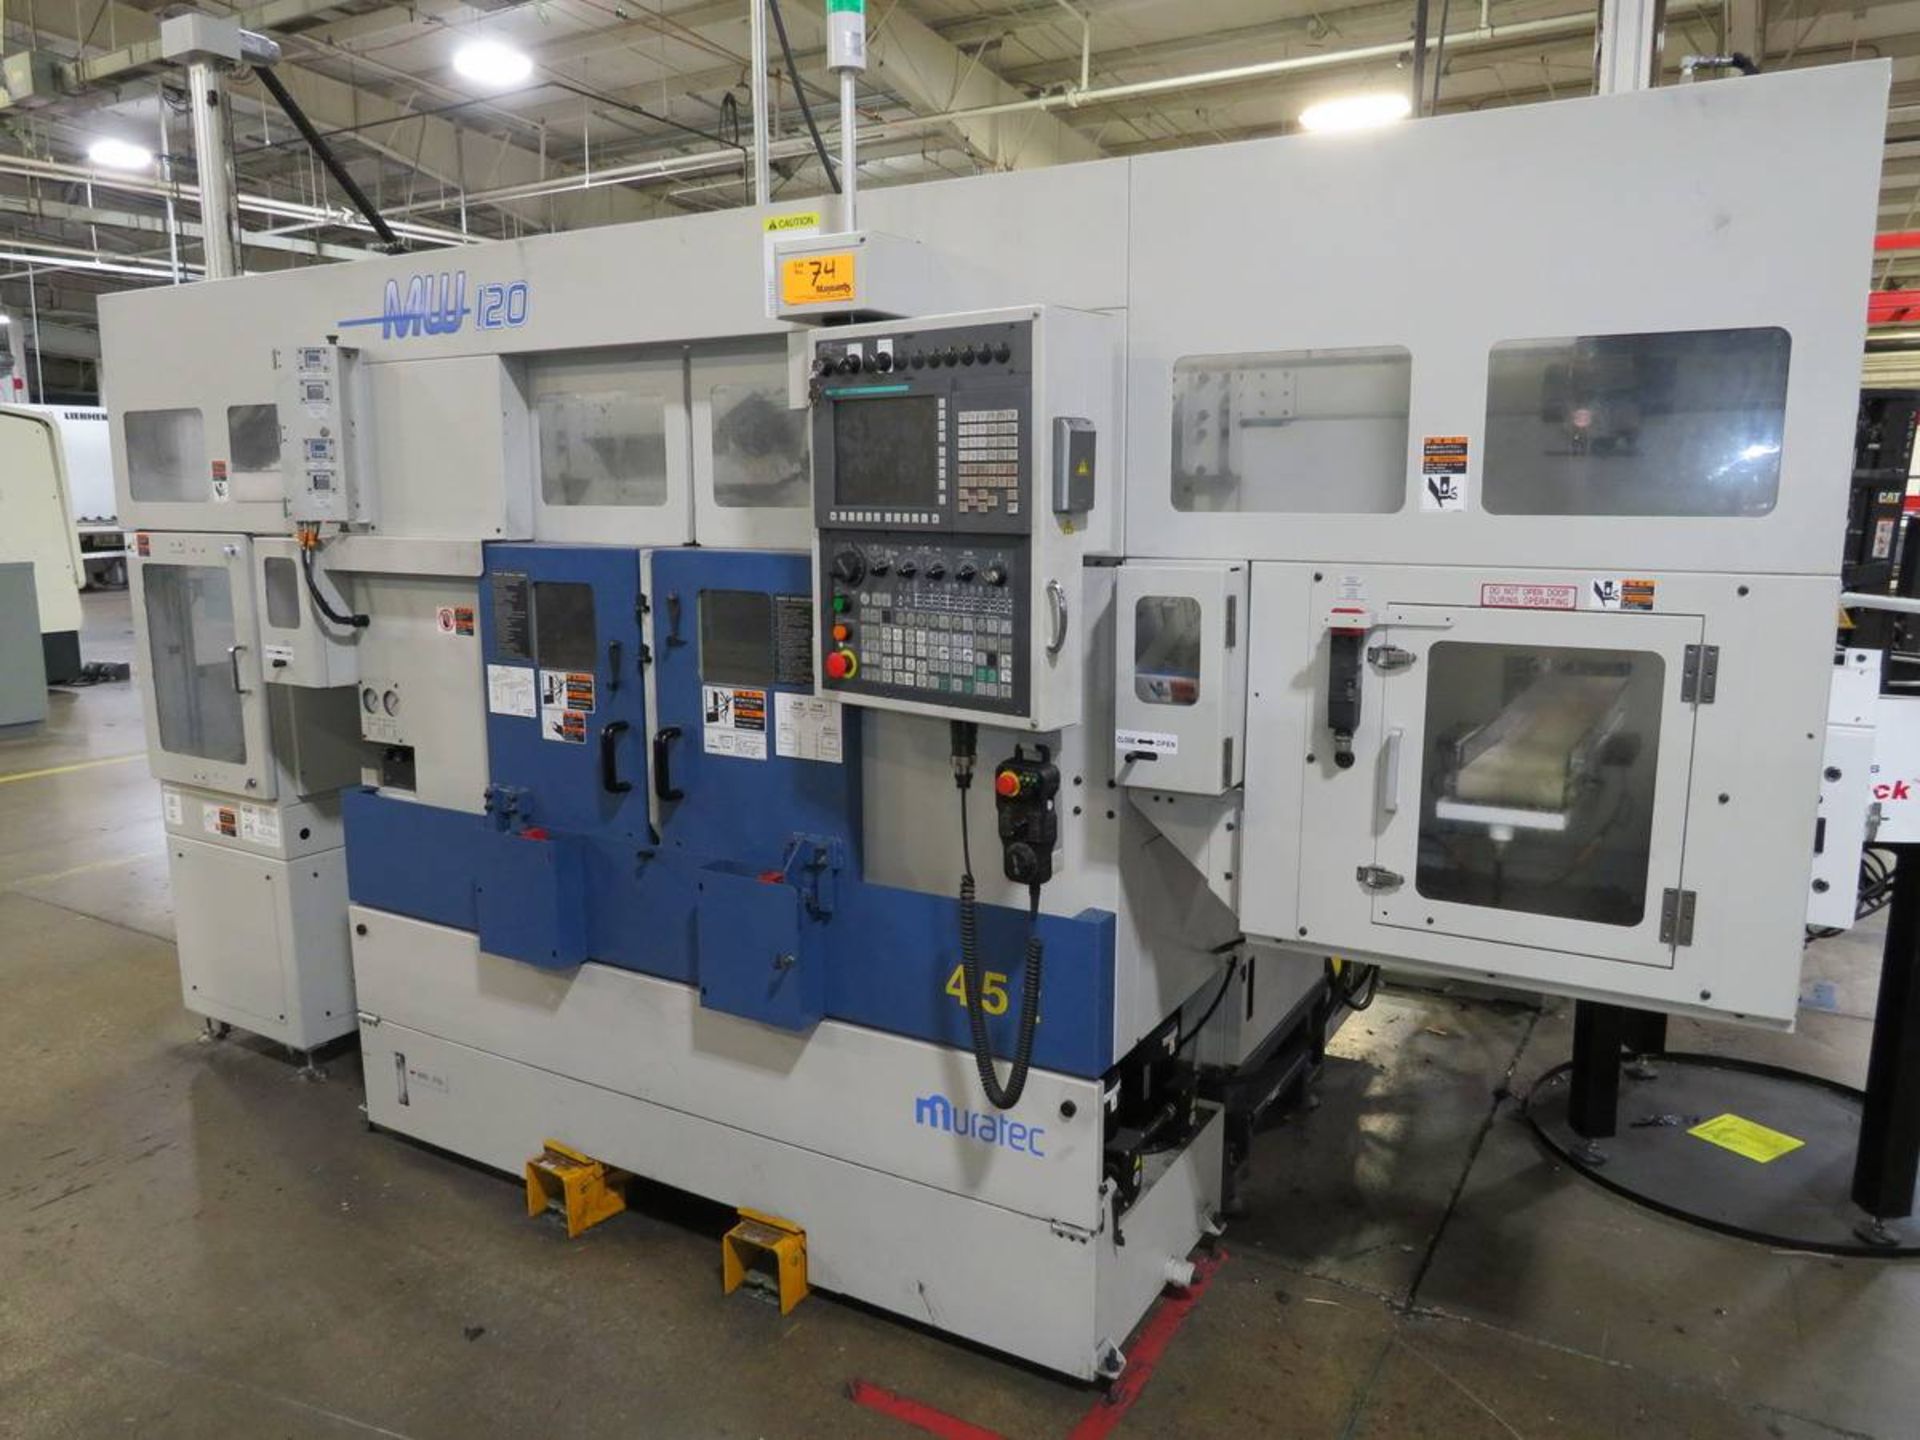 2018 Muratec MW120GT Twin Spindle CNC Turning Center - Image 5 of 7